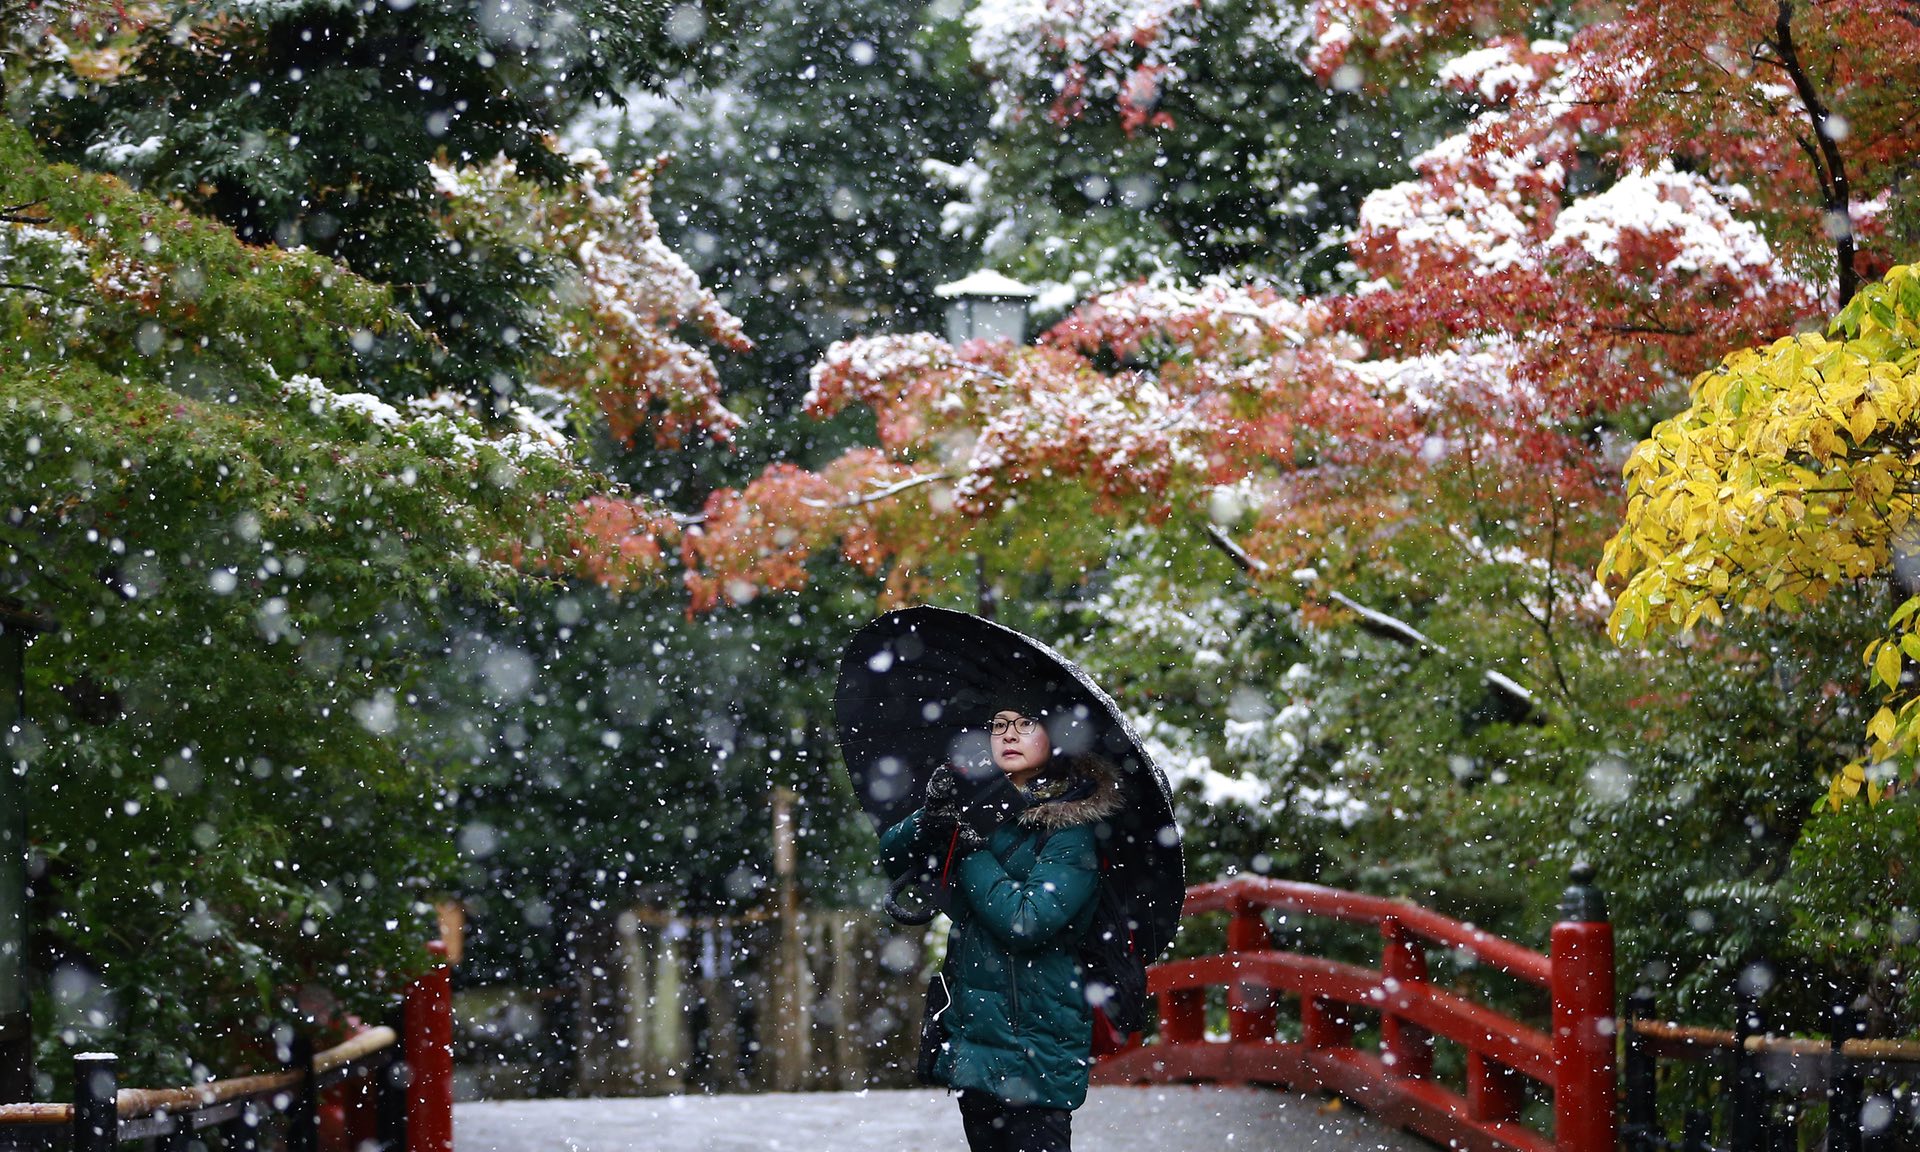 tokyo snow, Tokyo sees first November snow in more than 50 years, Tokyo sees first November snow in more than 50 years video, tokyo snow november 2016, tokyo japan snow video, tokyo snow record november 2016 